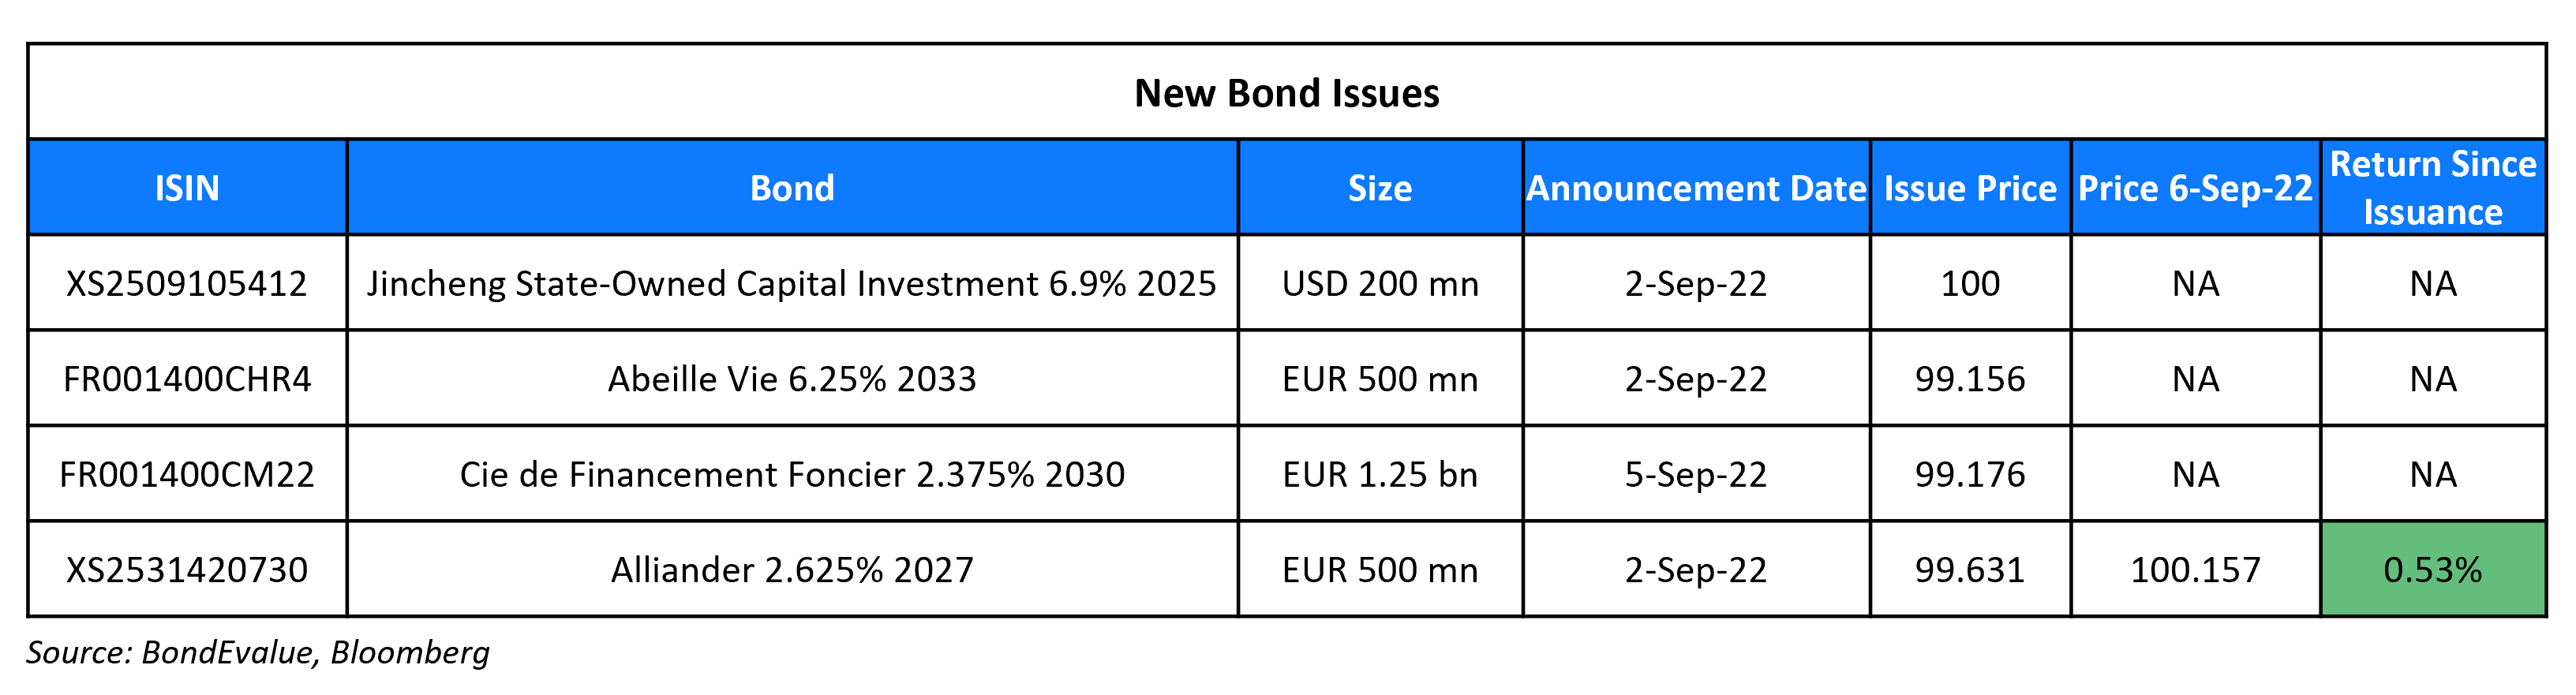 New Bond Issues 6 Sep 22